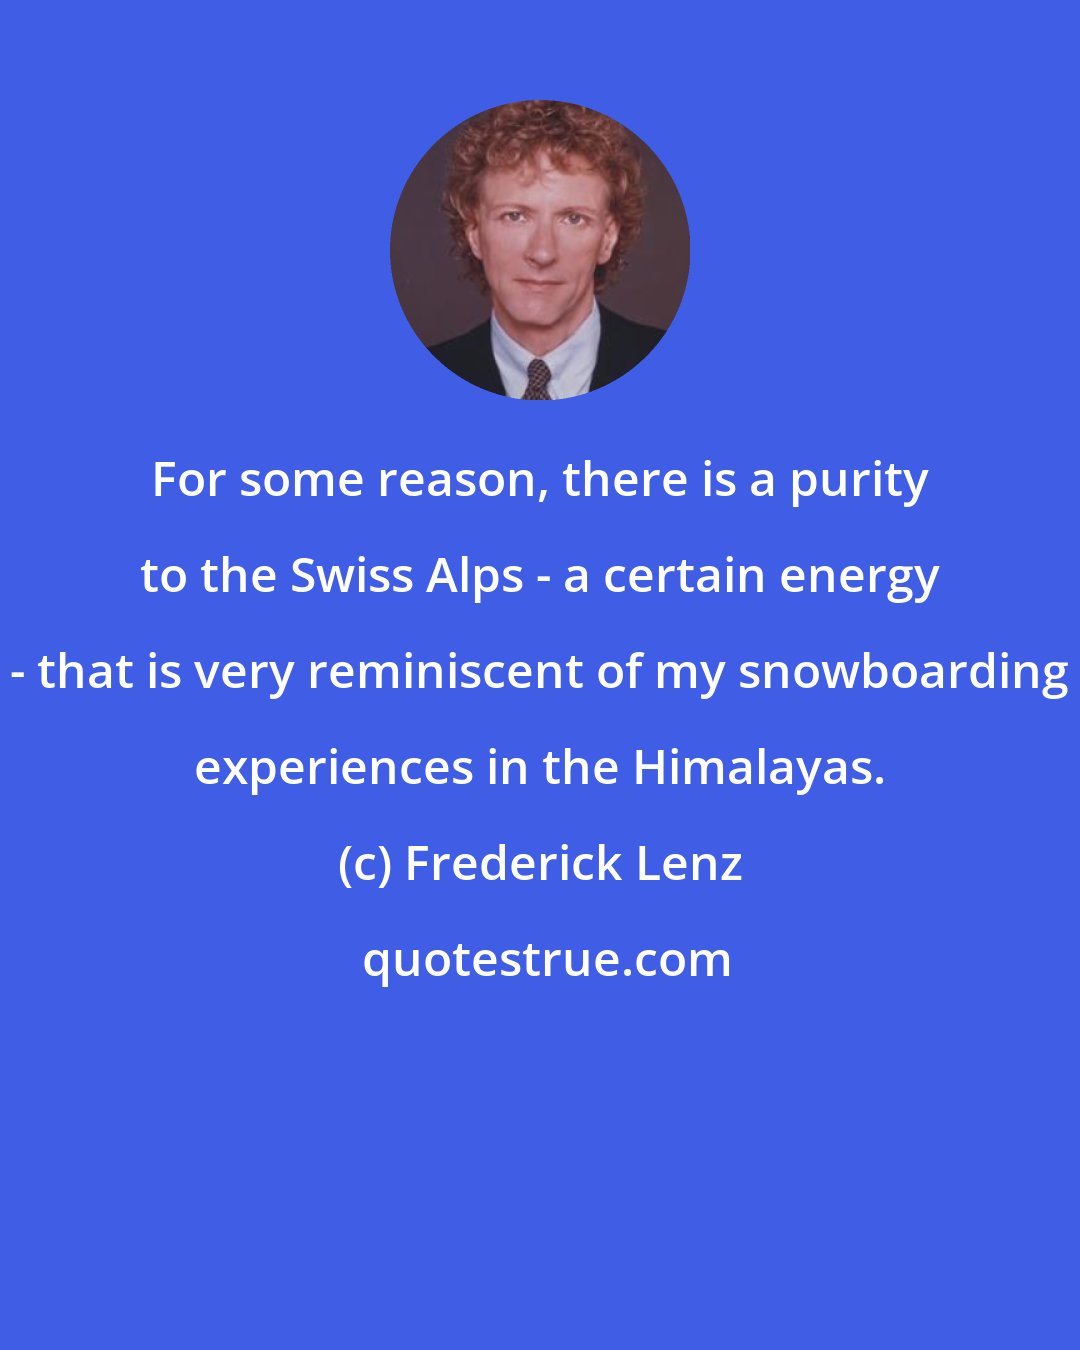 Frederick Lenz: For some reason, there is a purity to the Swiss Alps - a certain energy - that is very reminiscent of my snowboarding experiences in the Himalayas.